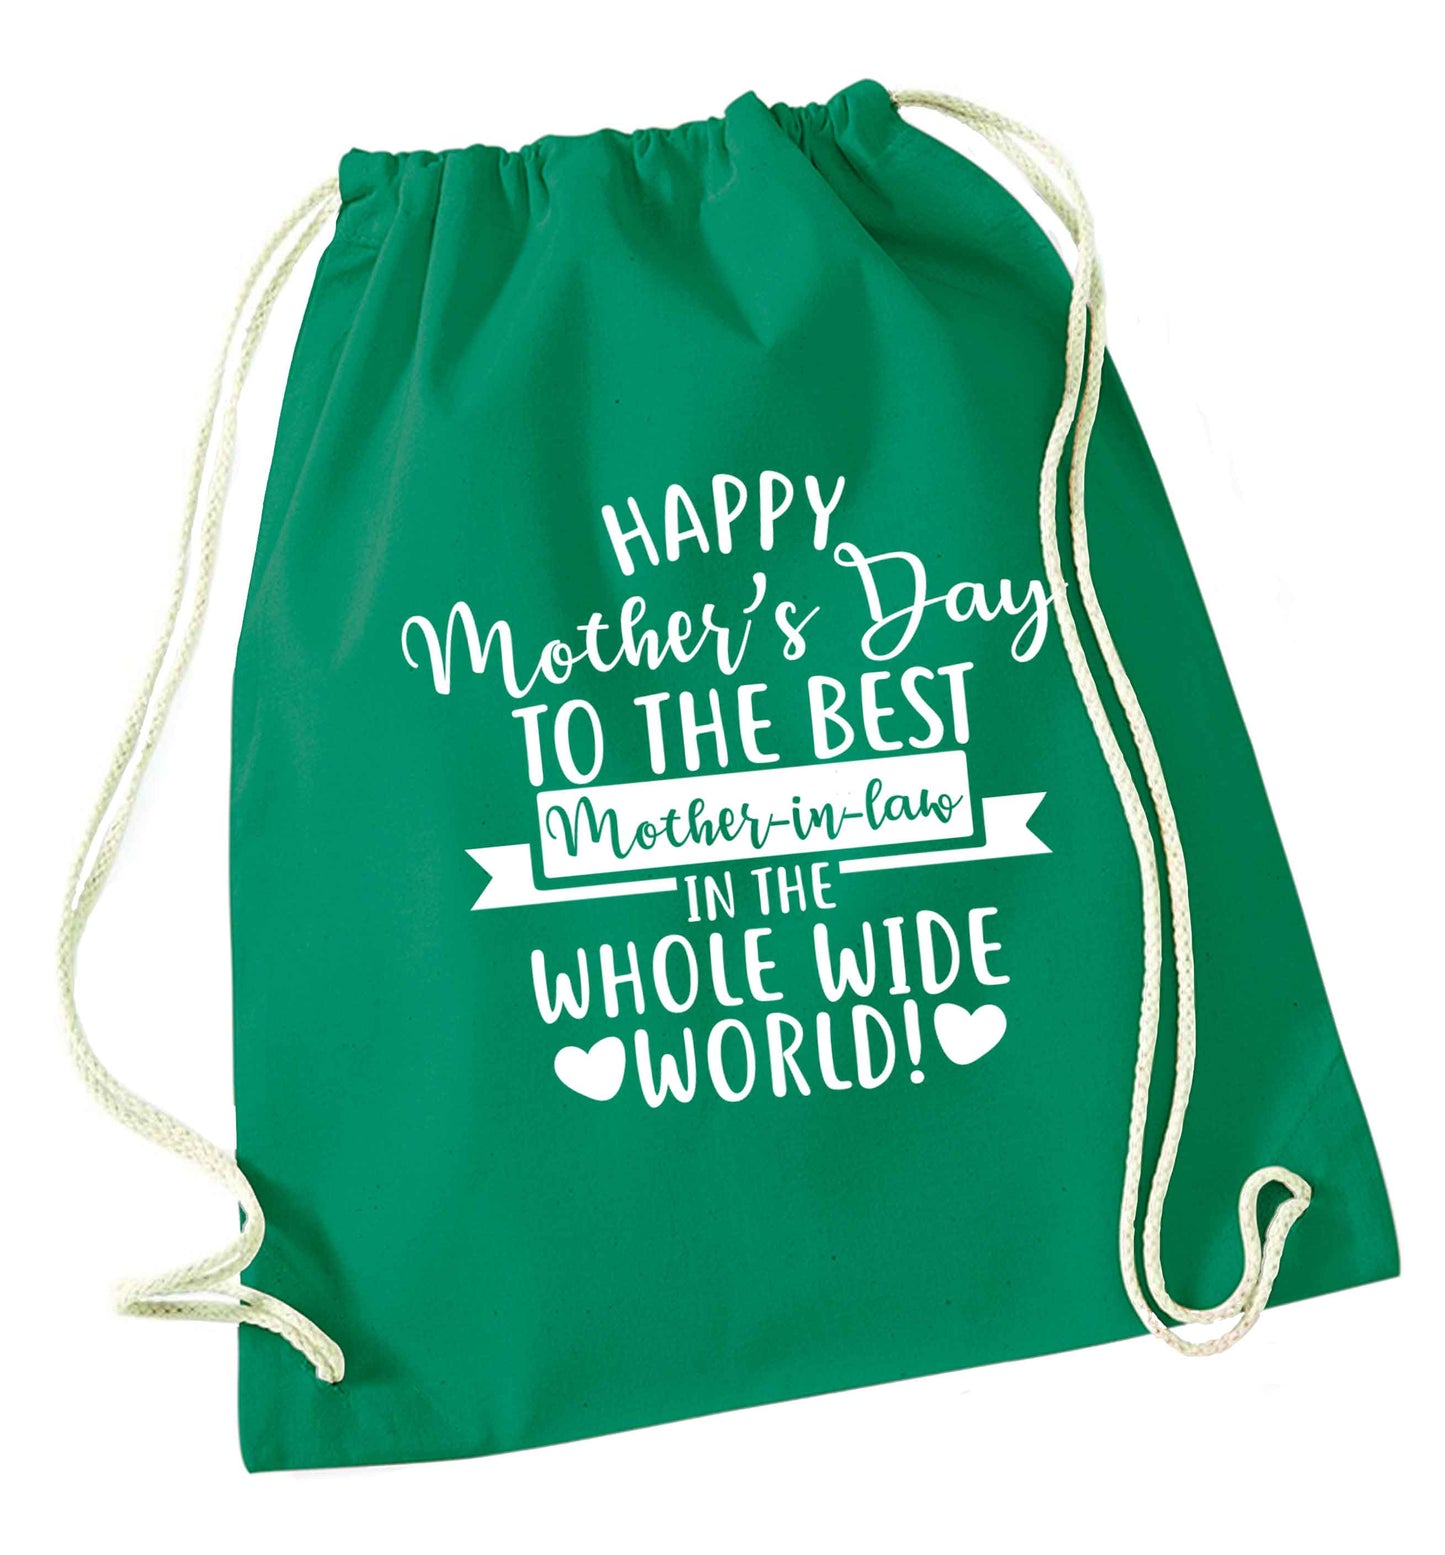 Happy mother's day to the best mother-in law in the world green drawstring bag